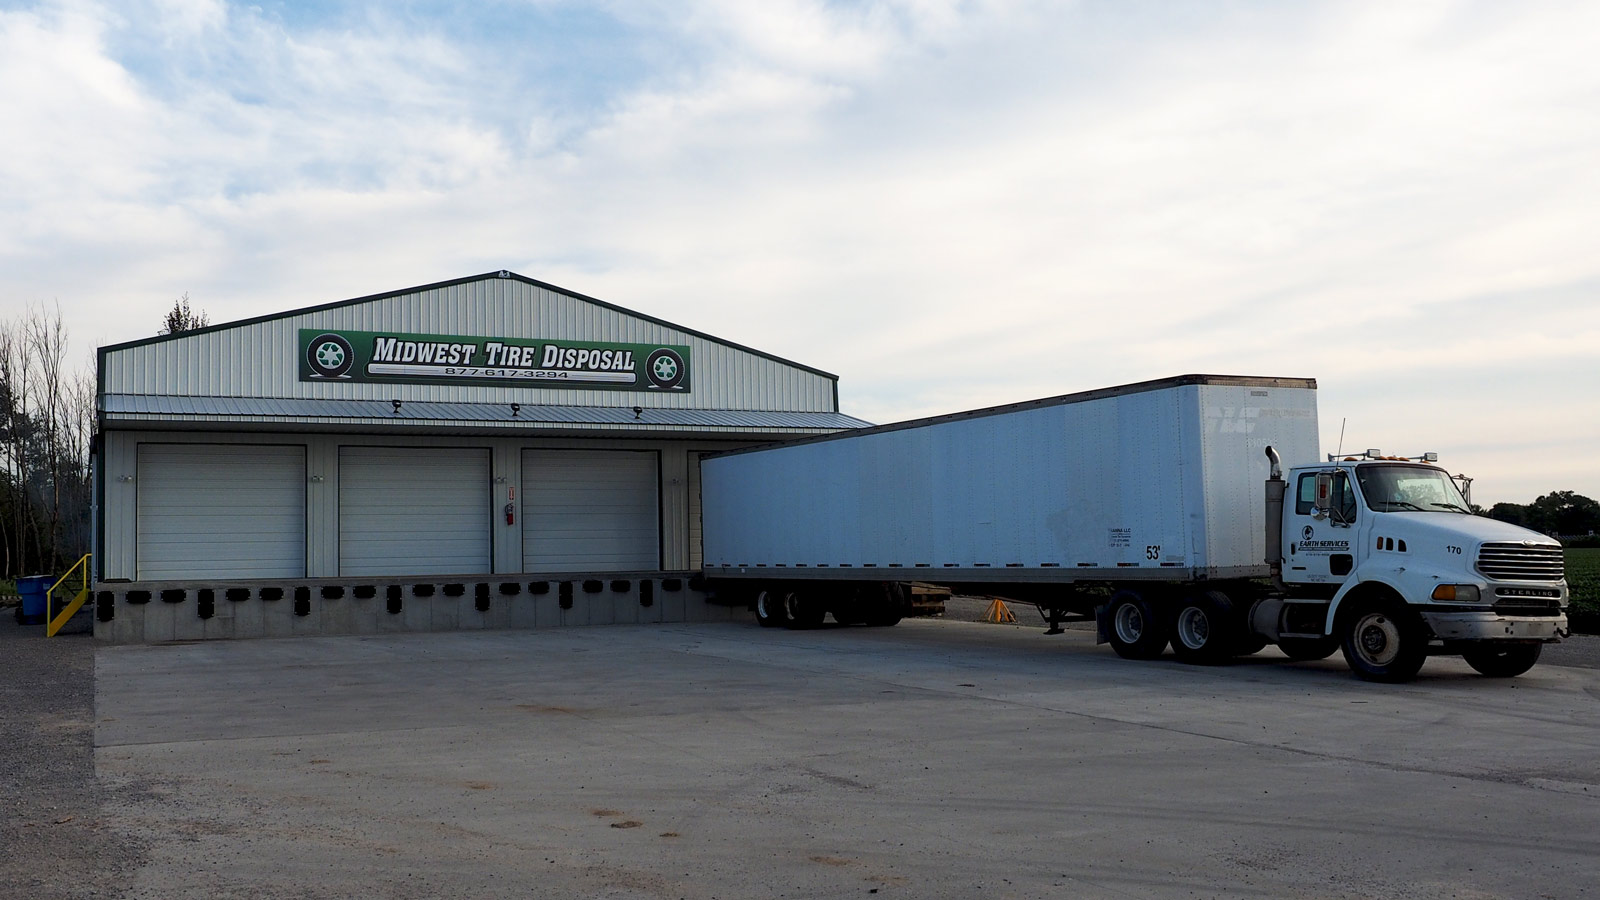 Midwest Tire Disposal Recycling Facility - Benton, Illinois